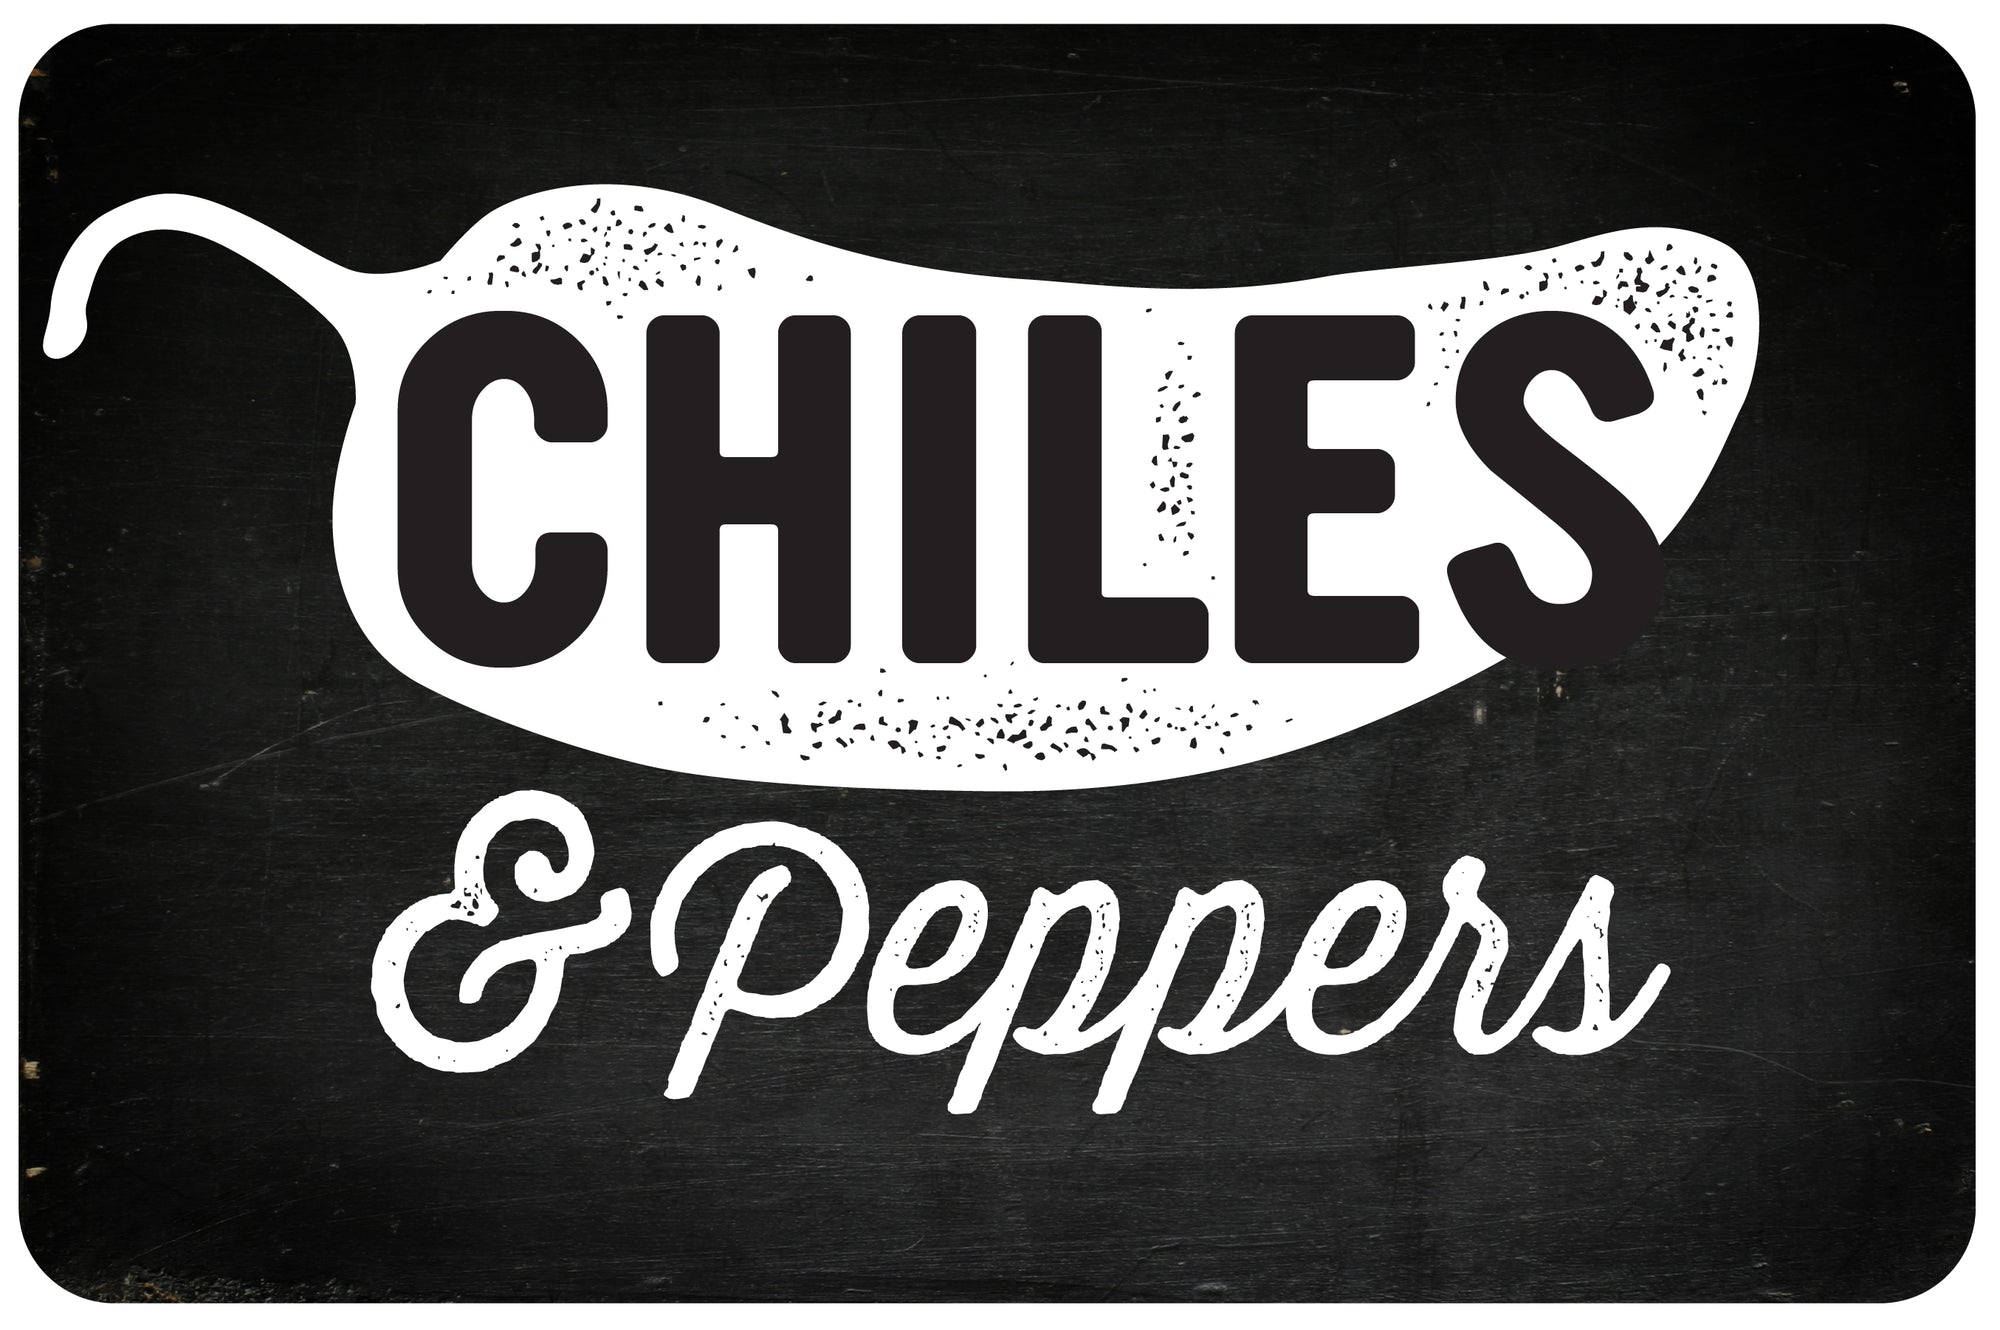 Chiles & Peppers